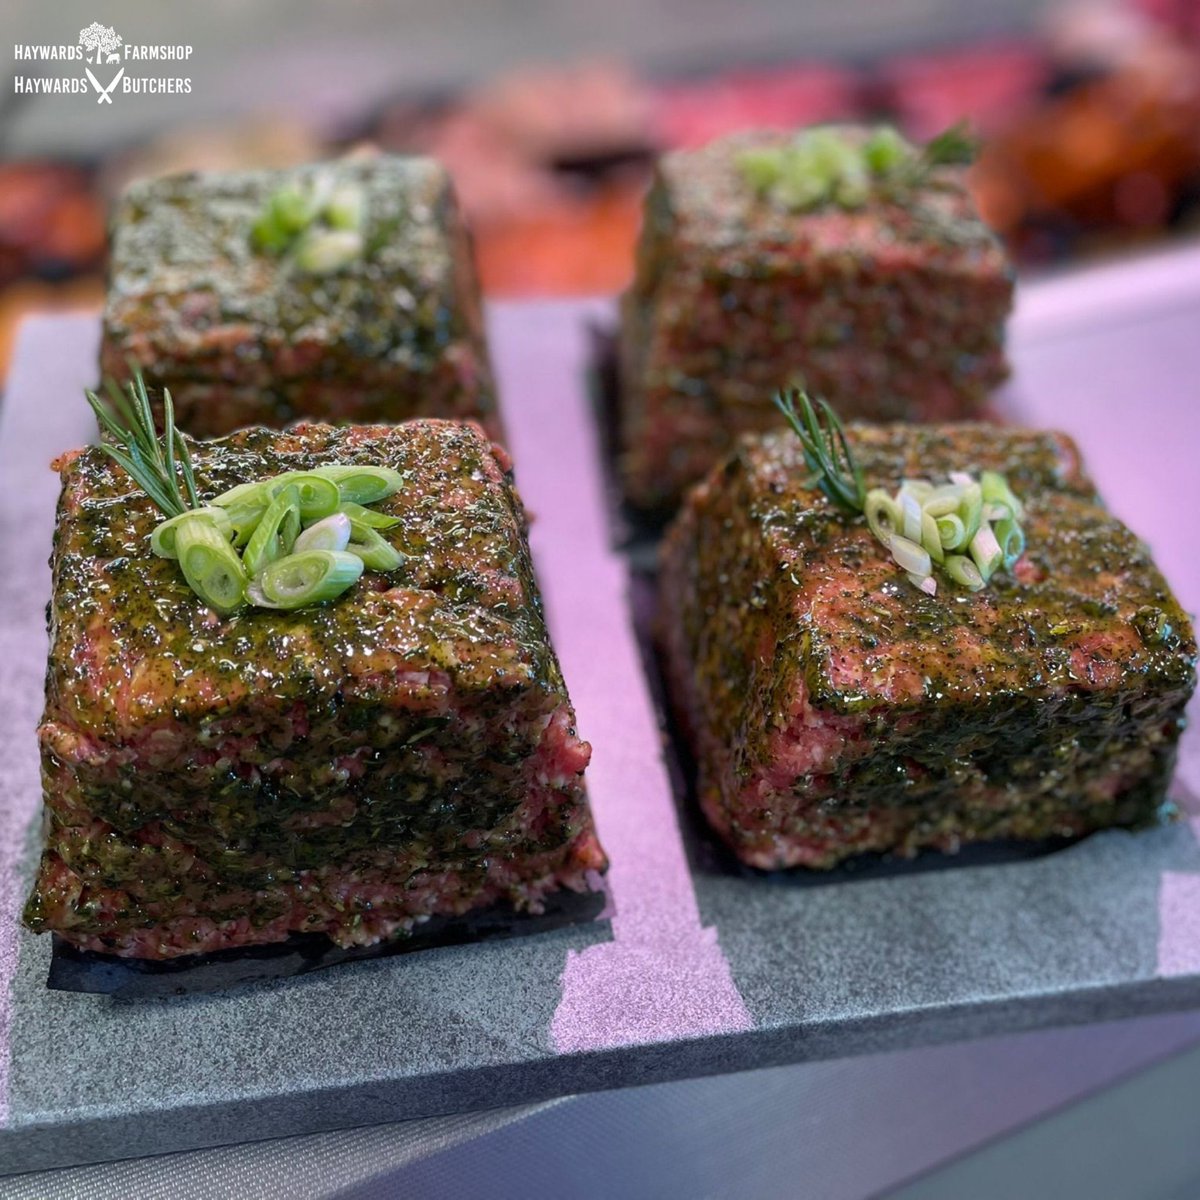 🌿🍖 Introducing our Lamb Meatloaf! A delightful blend of succulent lamb mince, onions, and a luscious rosemary-mint marinade. Elevate your dinner experience with this flavourful creation #LambMeatloaf #MidweekDinner #EasyMeal #ShopLocal #ButcherDelights #Tonbridge #Haywards1990